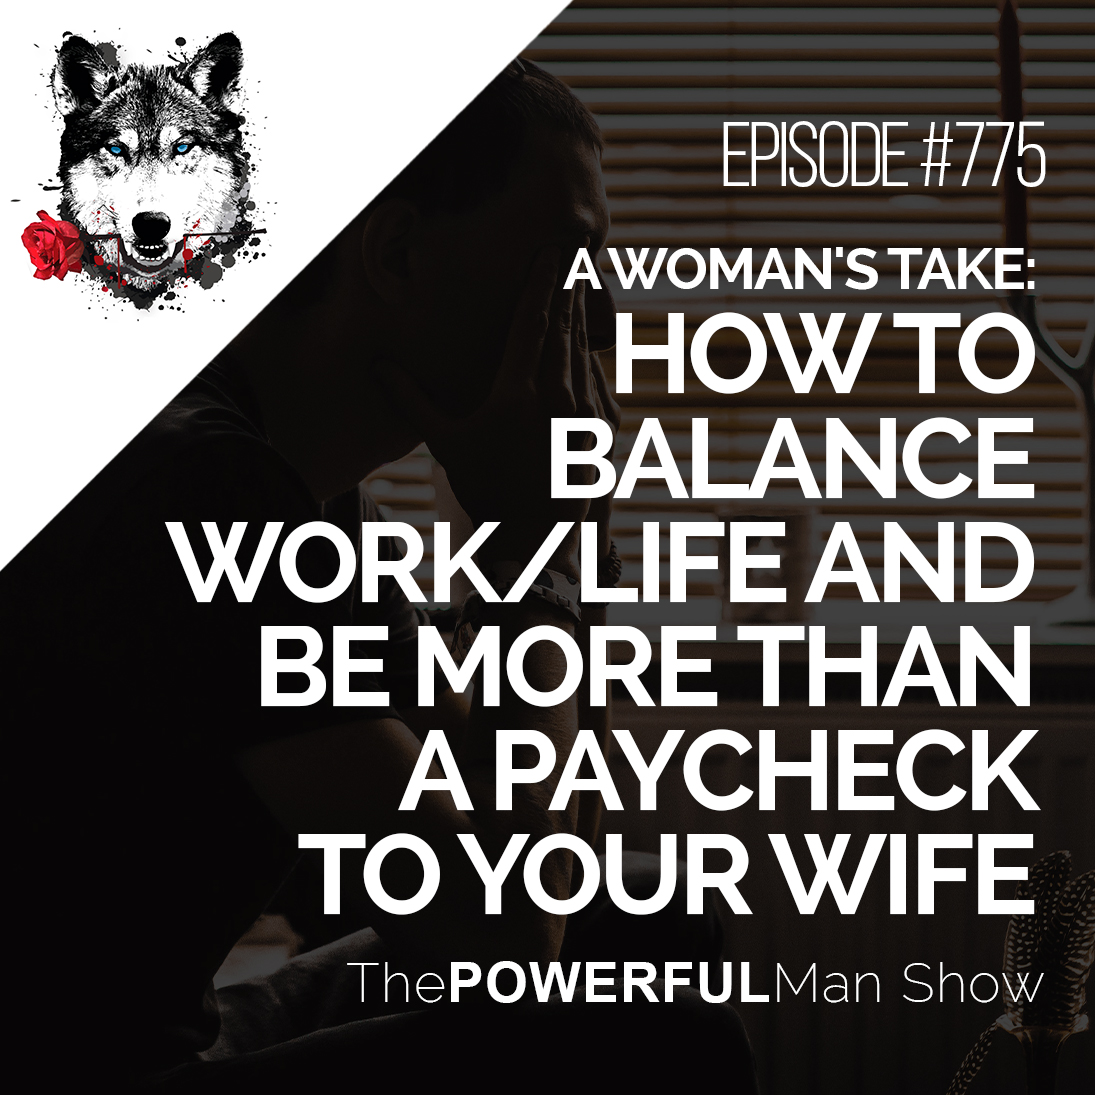 A Woman’s Take: How To Balance Work/Life And Be More Than A Paycheck To Your Wife